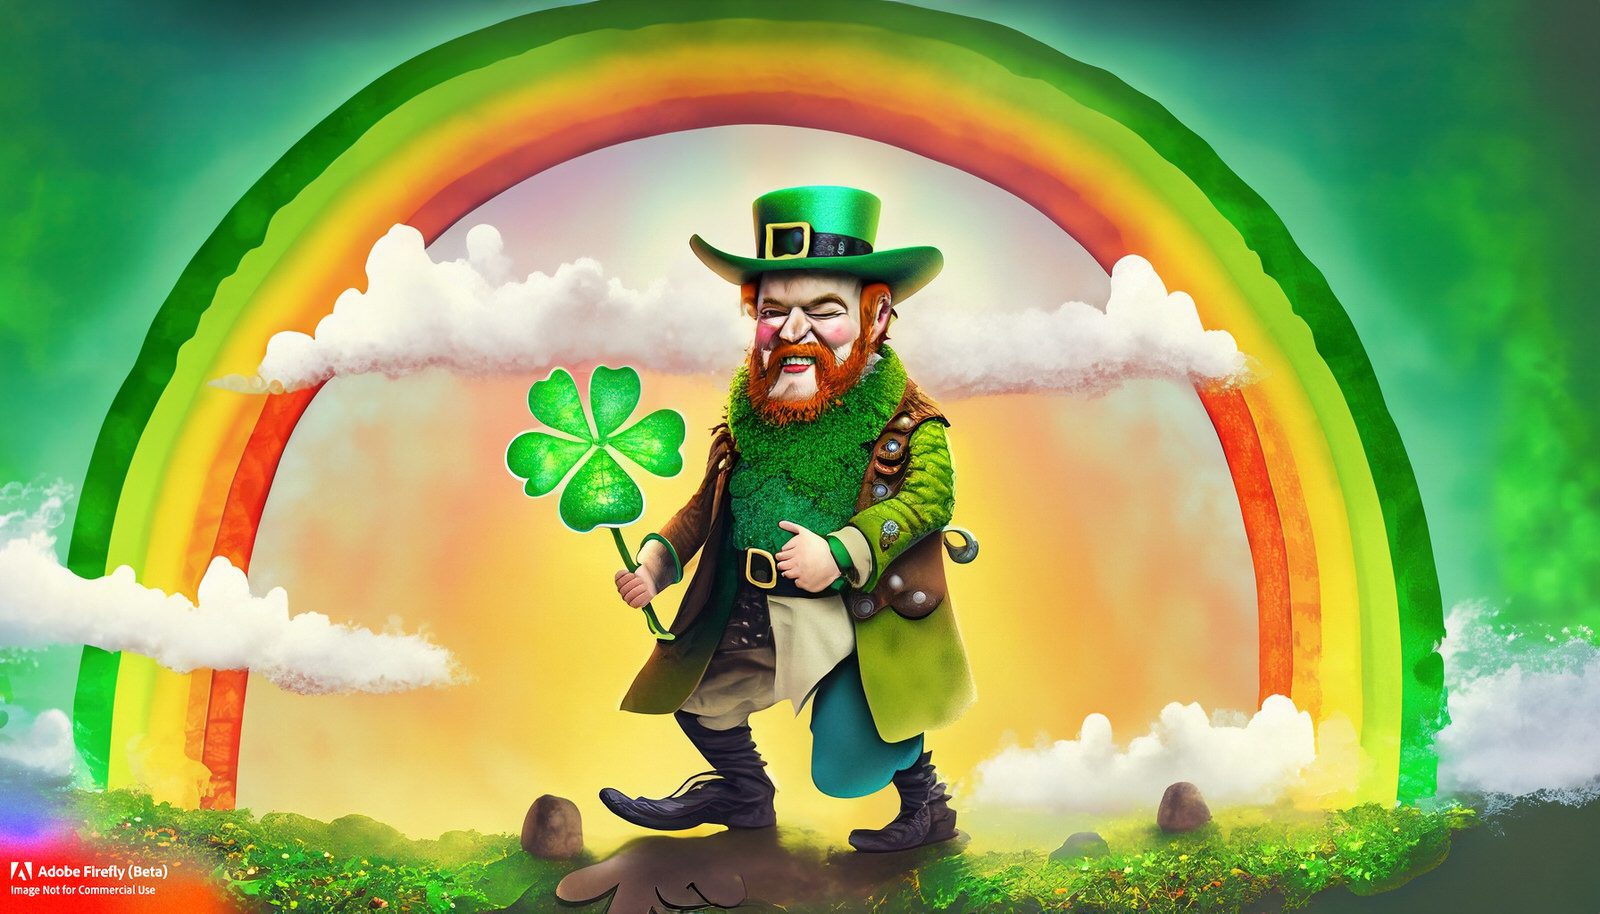 IF YOU ASK ADOBE FIREFLY TO GENERATE AN IMAGE OF A LEPRECHAUN THIS IS WHAT YOU GET 001